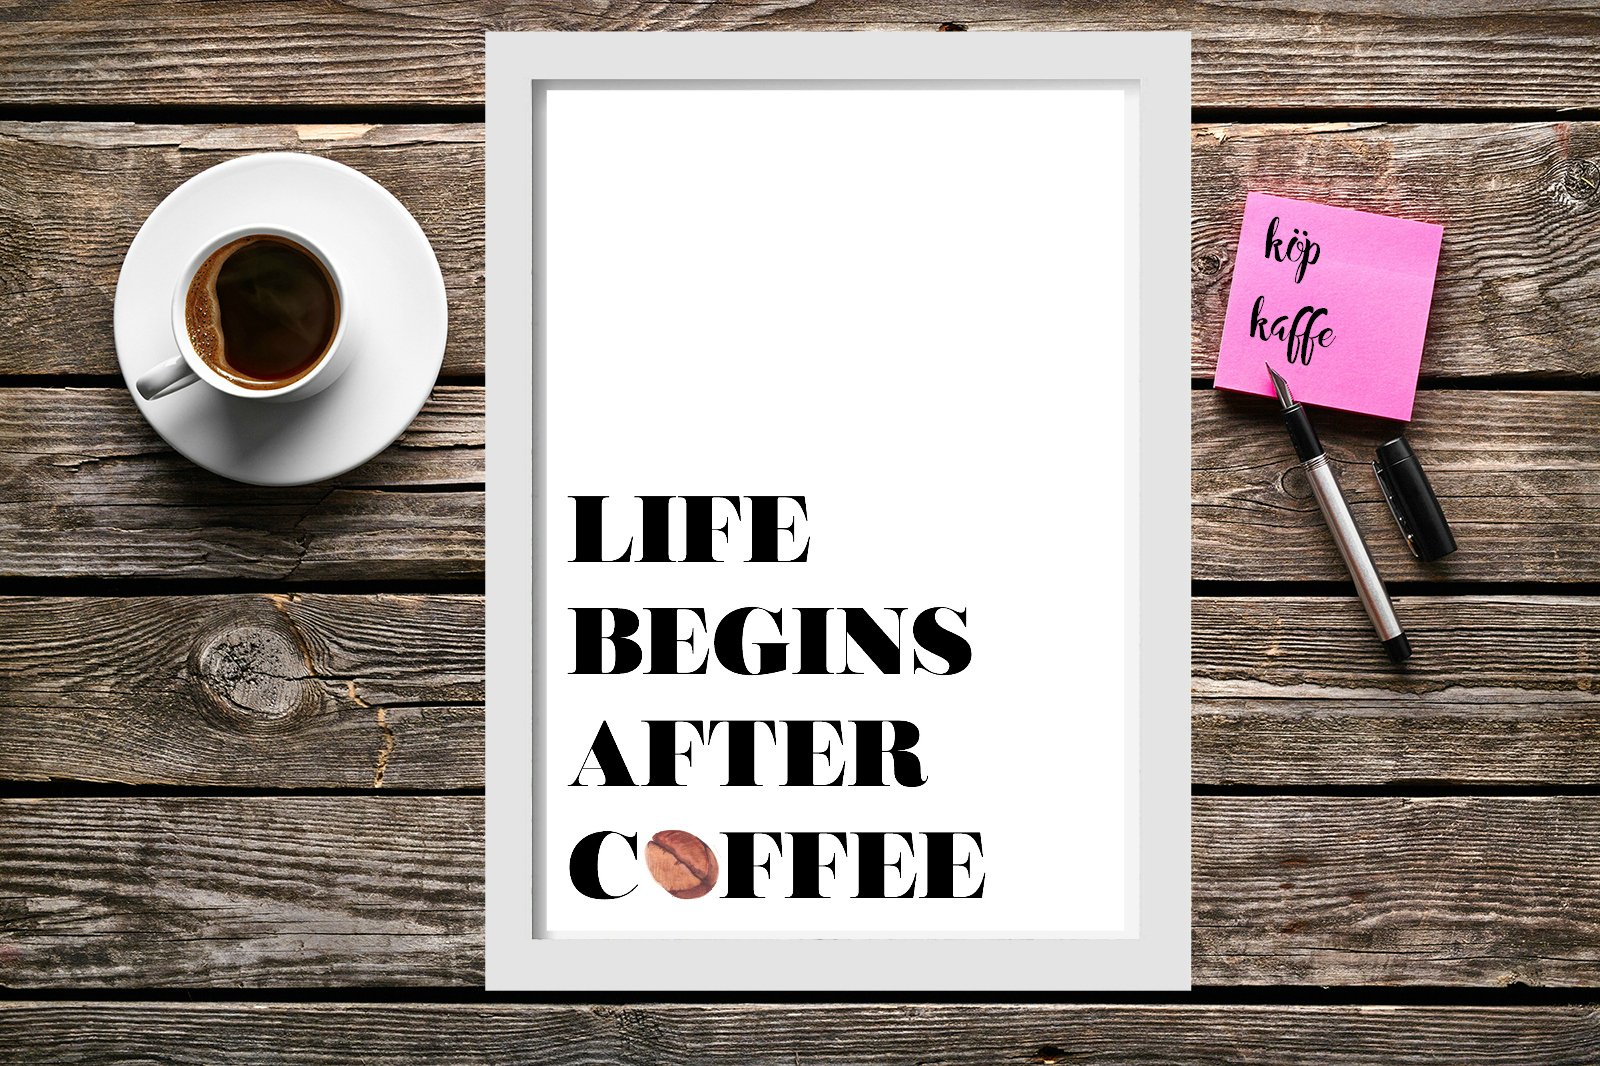 Life begins after coffee - A4